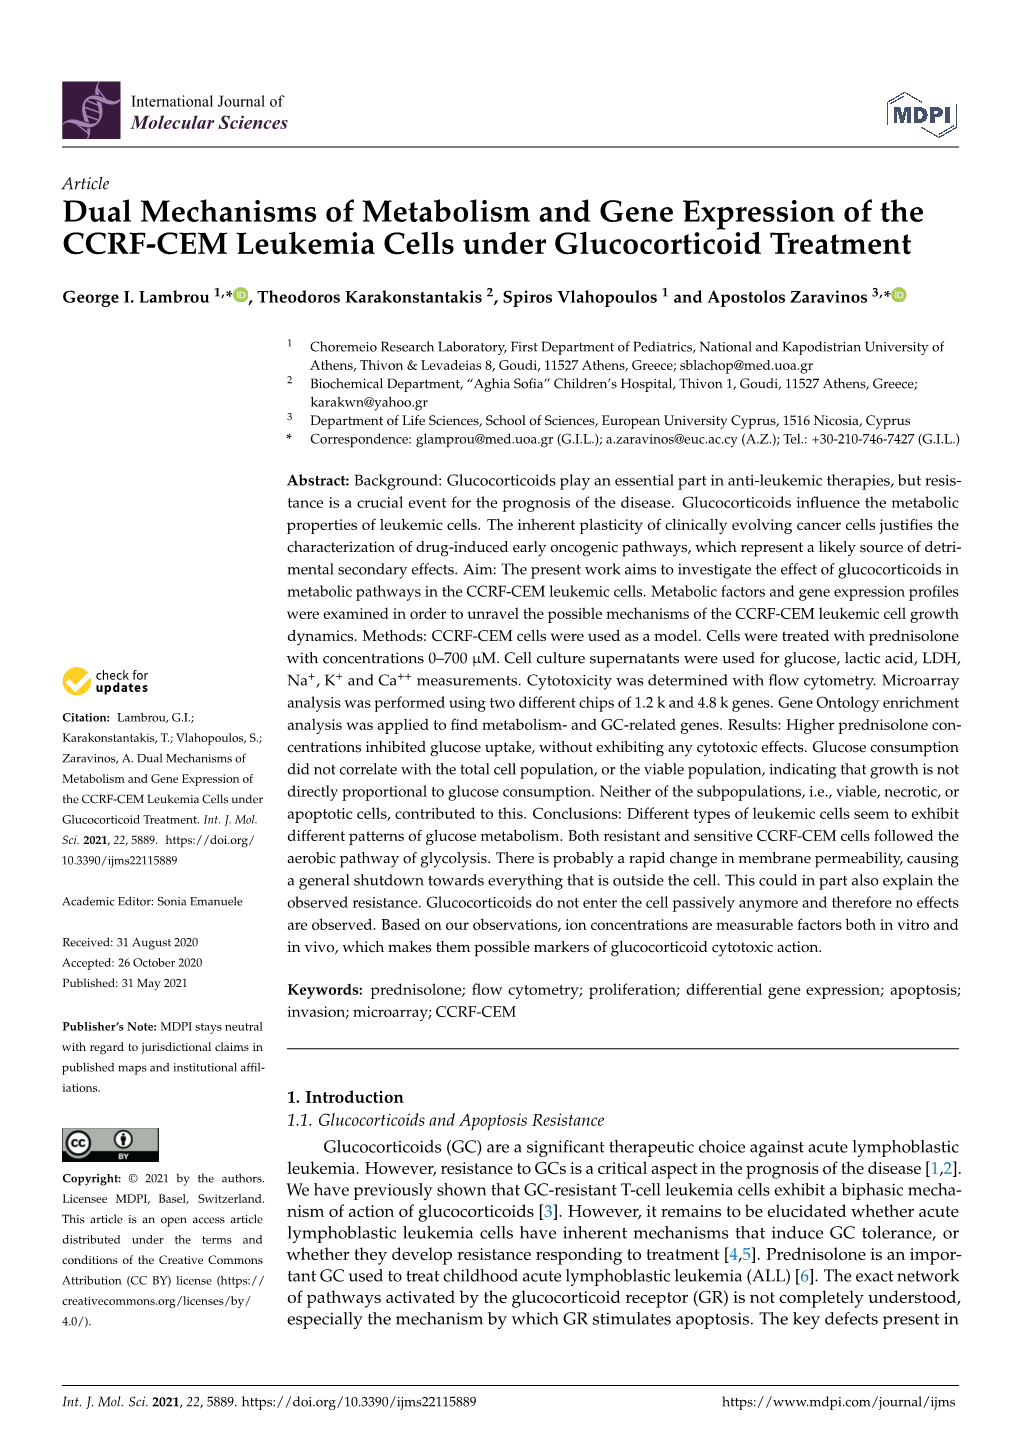 Dual Mechanisms of Metabolism and Gene Expression of the CCRF-CEM Leukemia Cells Under Glucocorticoid Treatment